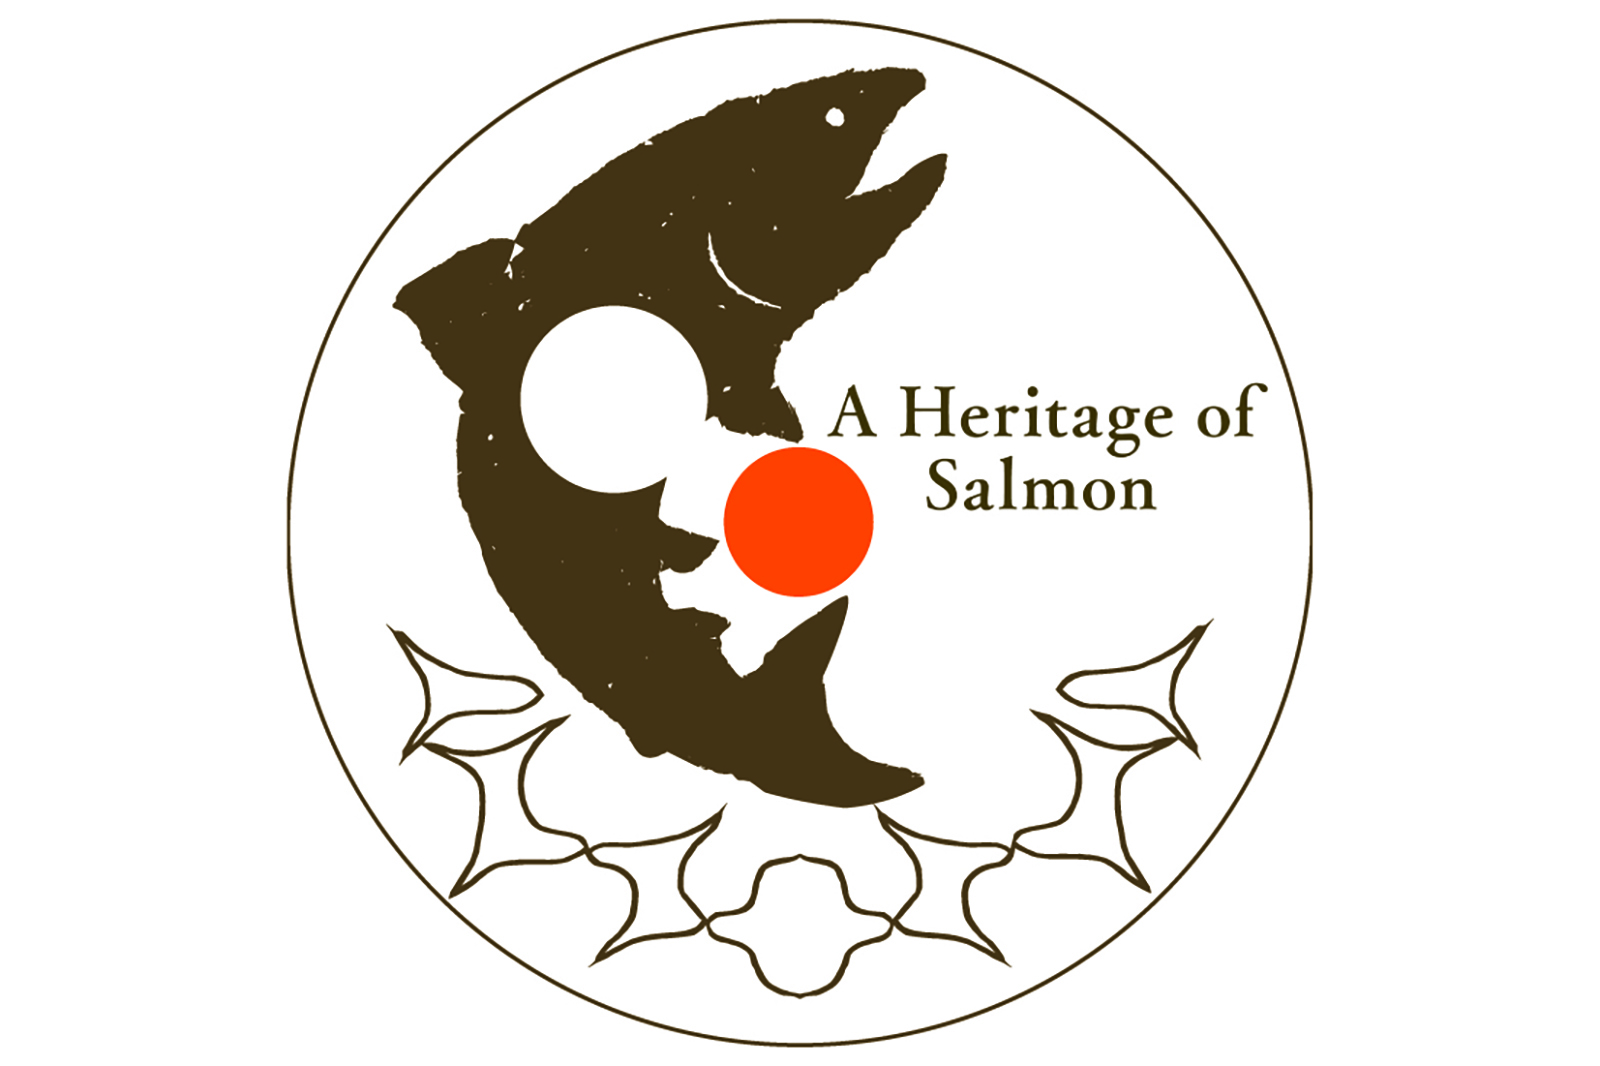 A Heritage of Salmon